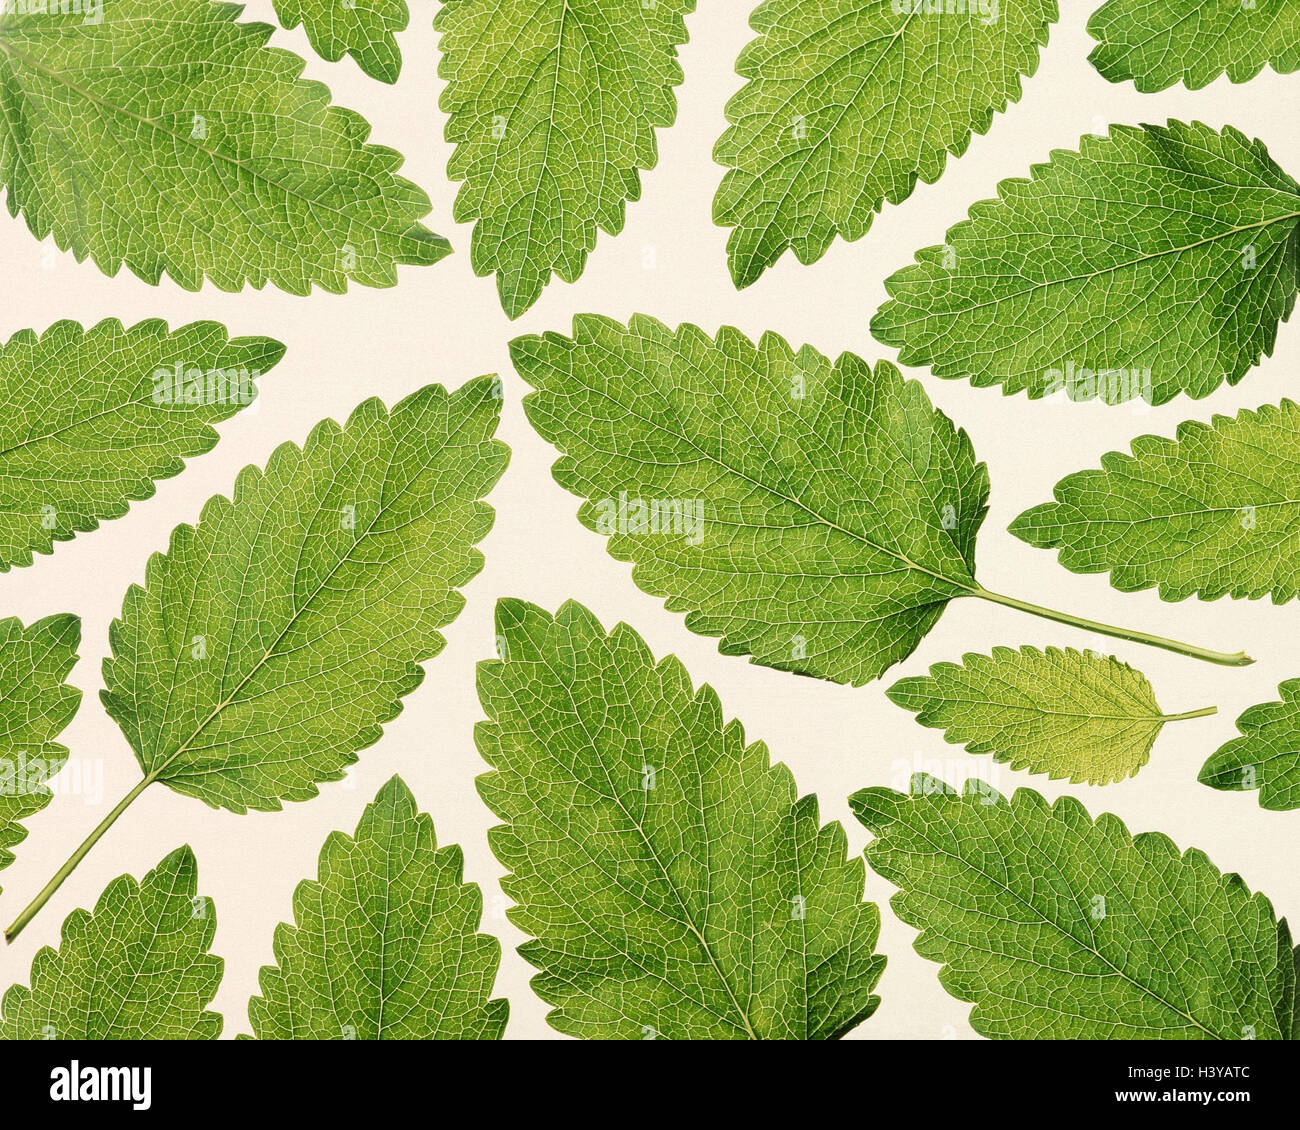 Lemon balm, Melissa officinalis, leaves plant, spice, medicinal plants, herbs, cut outs, green Stock Photo